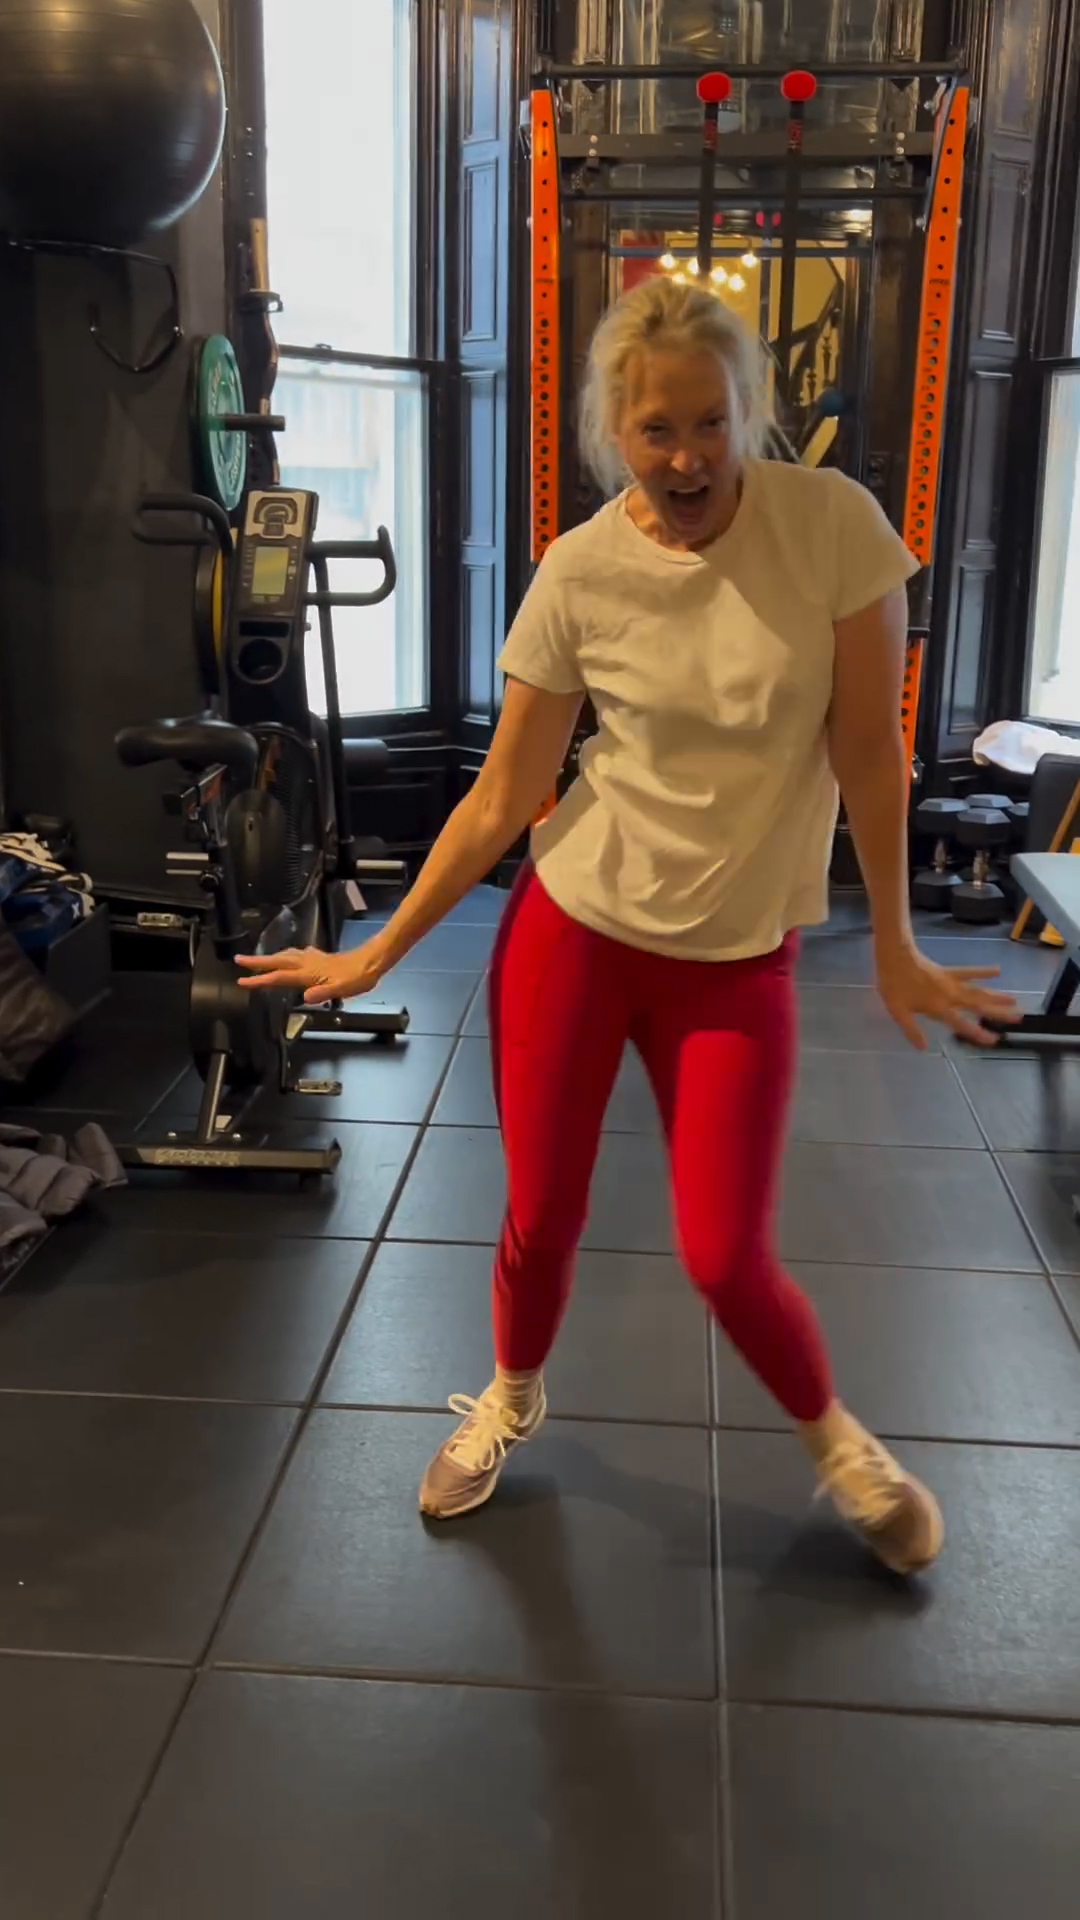 Ali wore a white T-shirt and red leggings in the video while at the gym